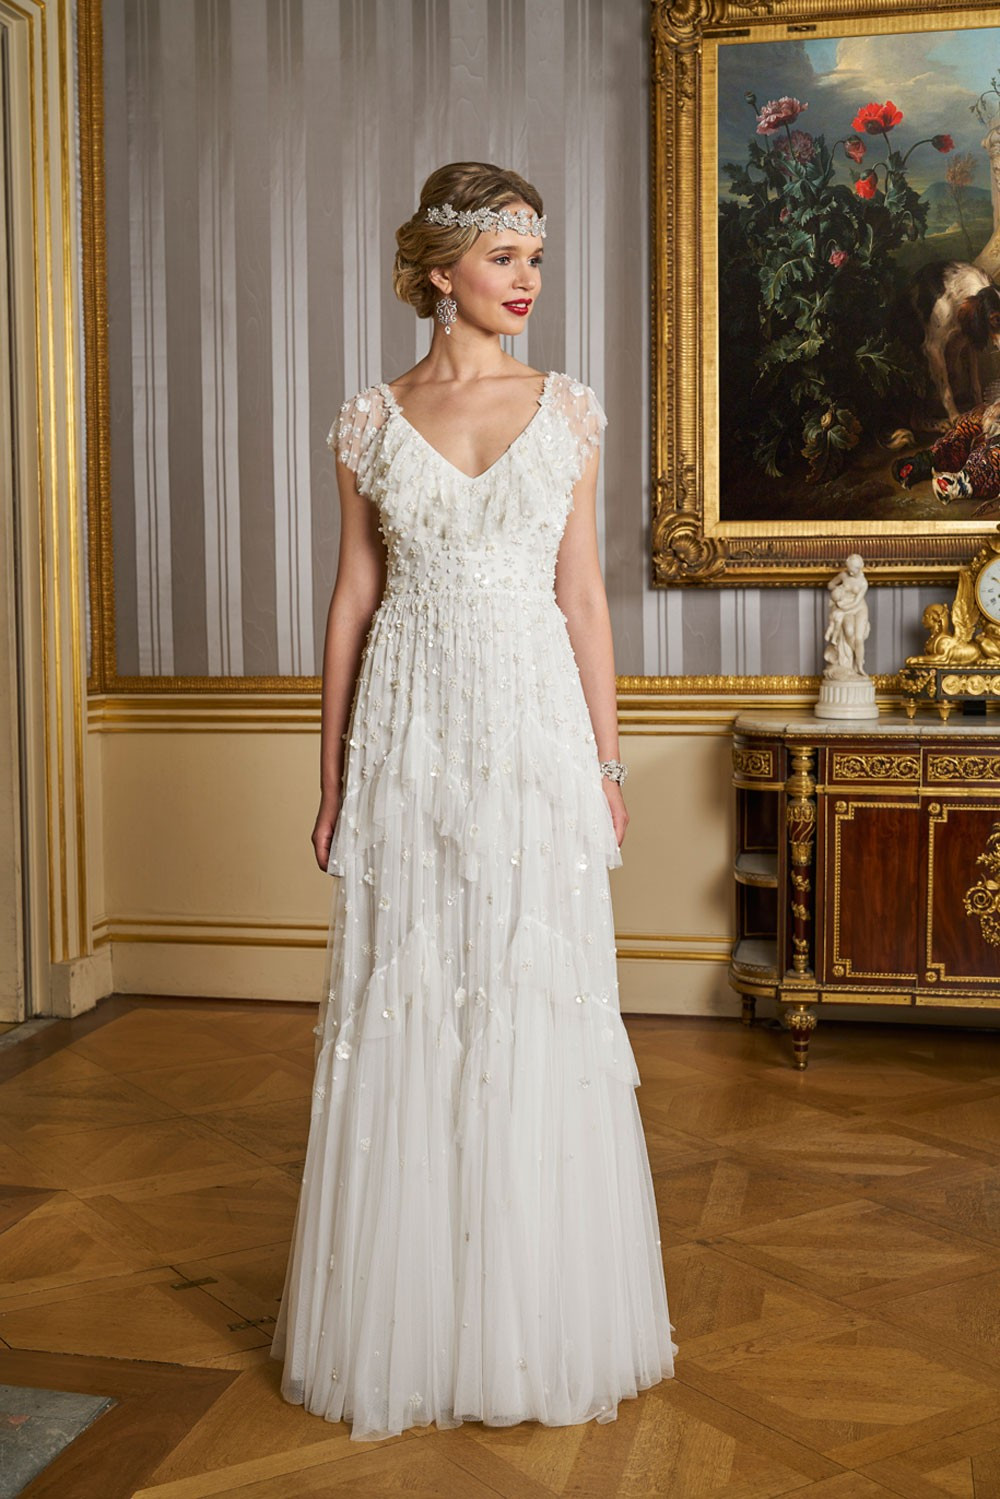 Mature Wedding Gowns
 21 Wedding Dresses for Older Brides Top Tips and Advice